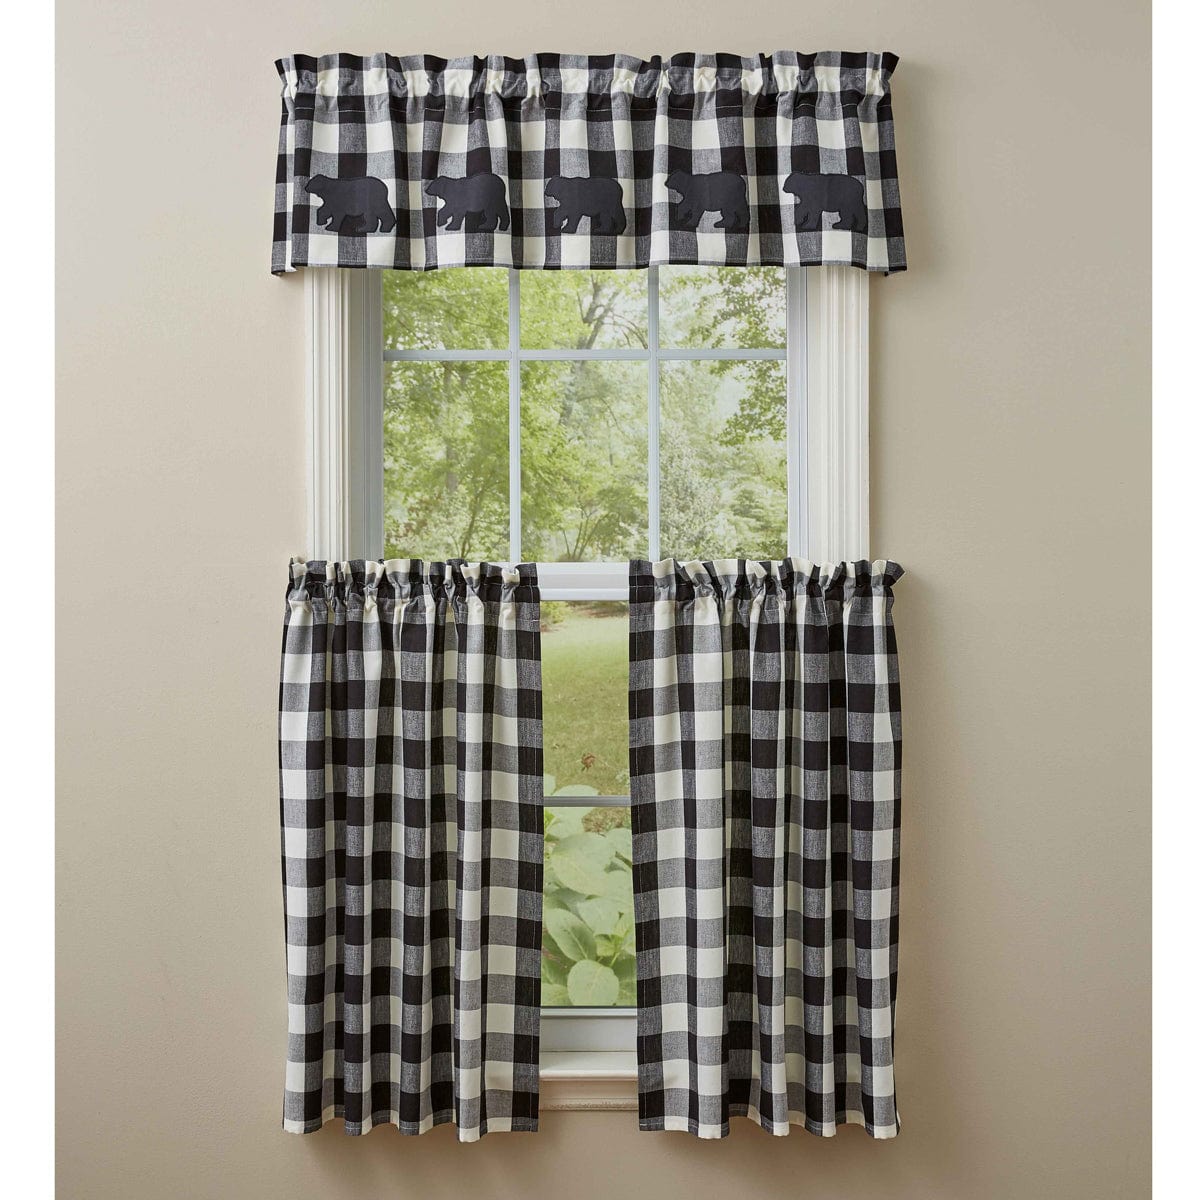 Wicklow Check in Black &amp; Cream Bear Valance Lined-Park Designs-The Village Merchant